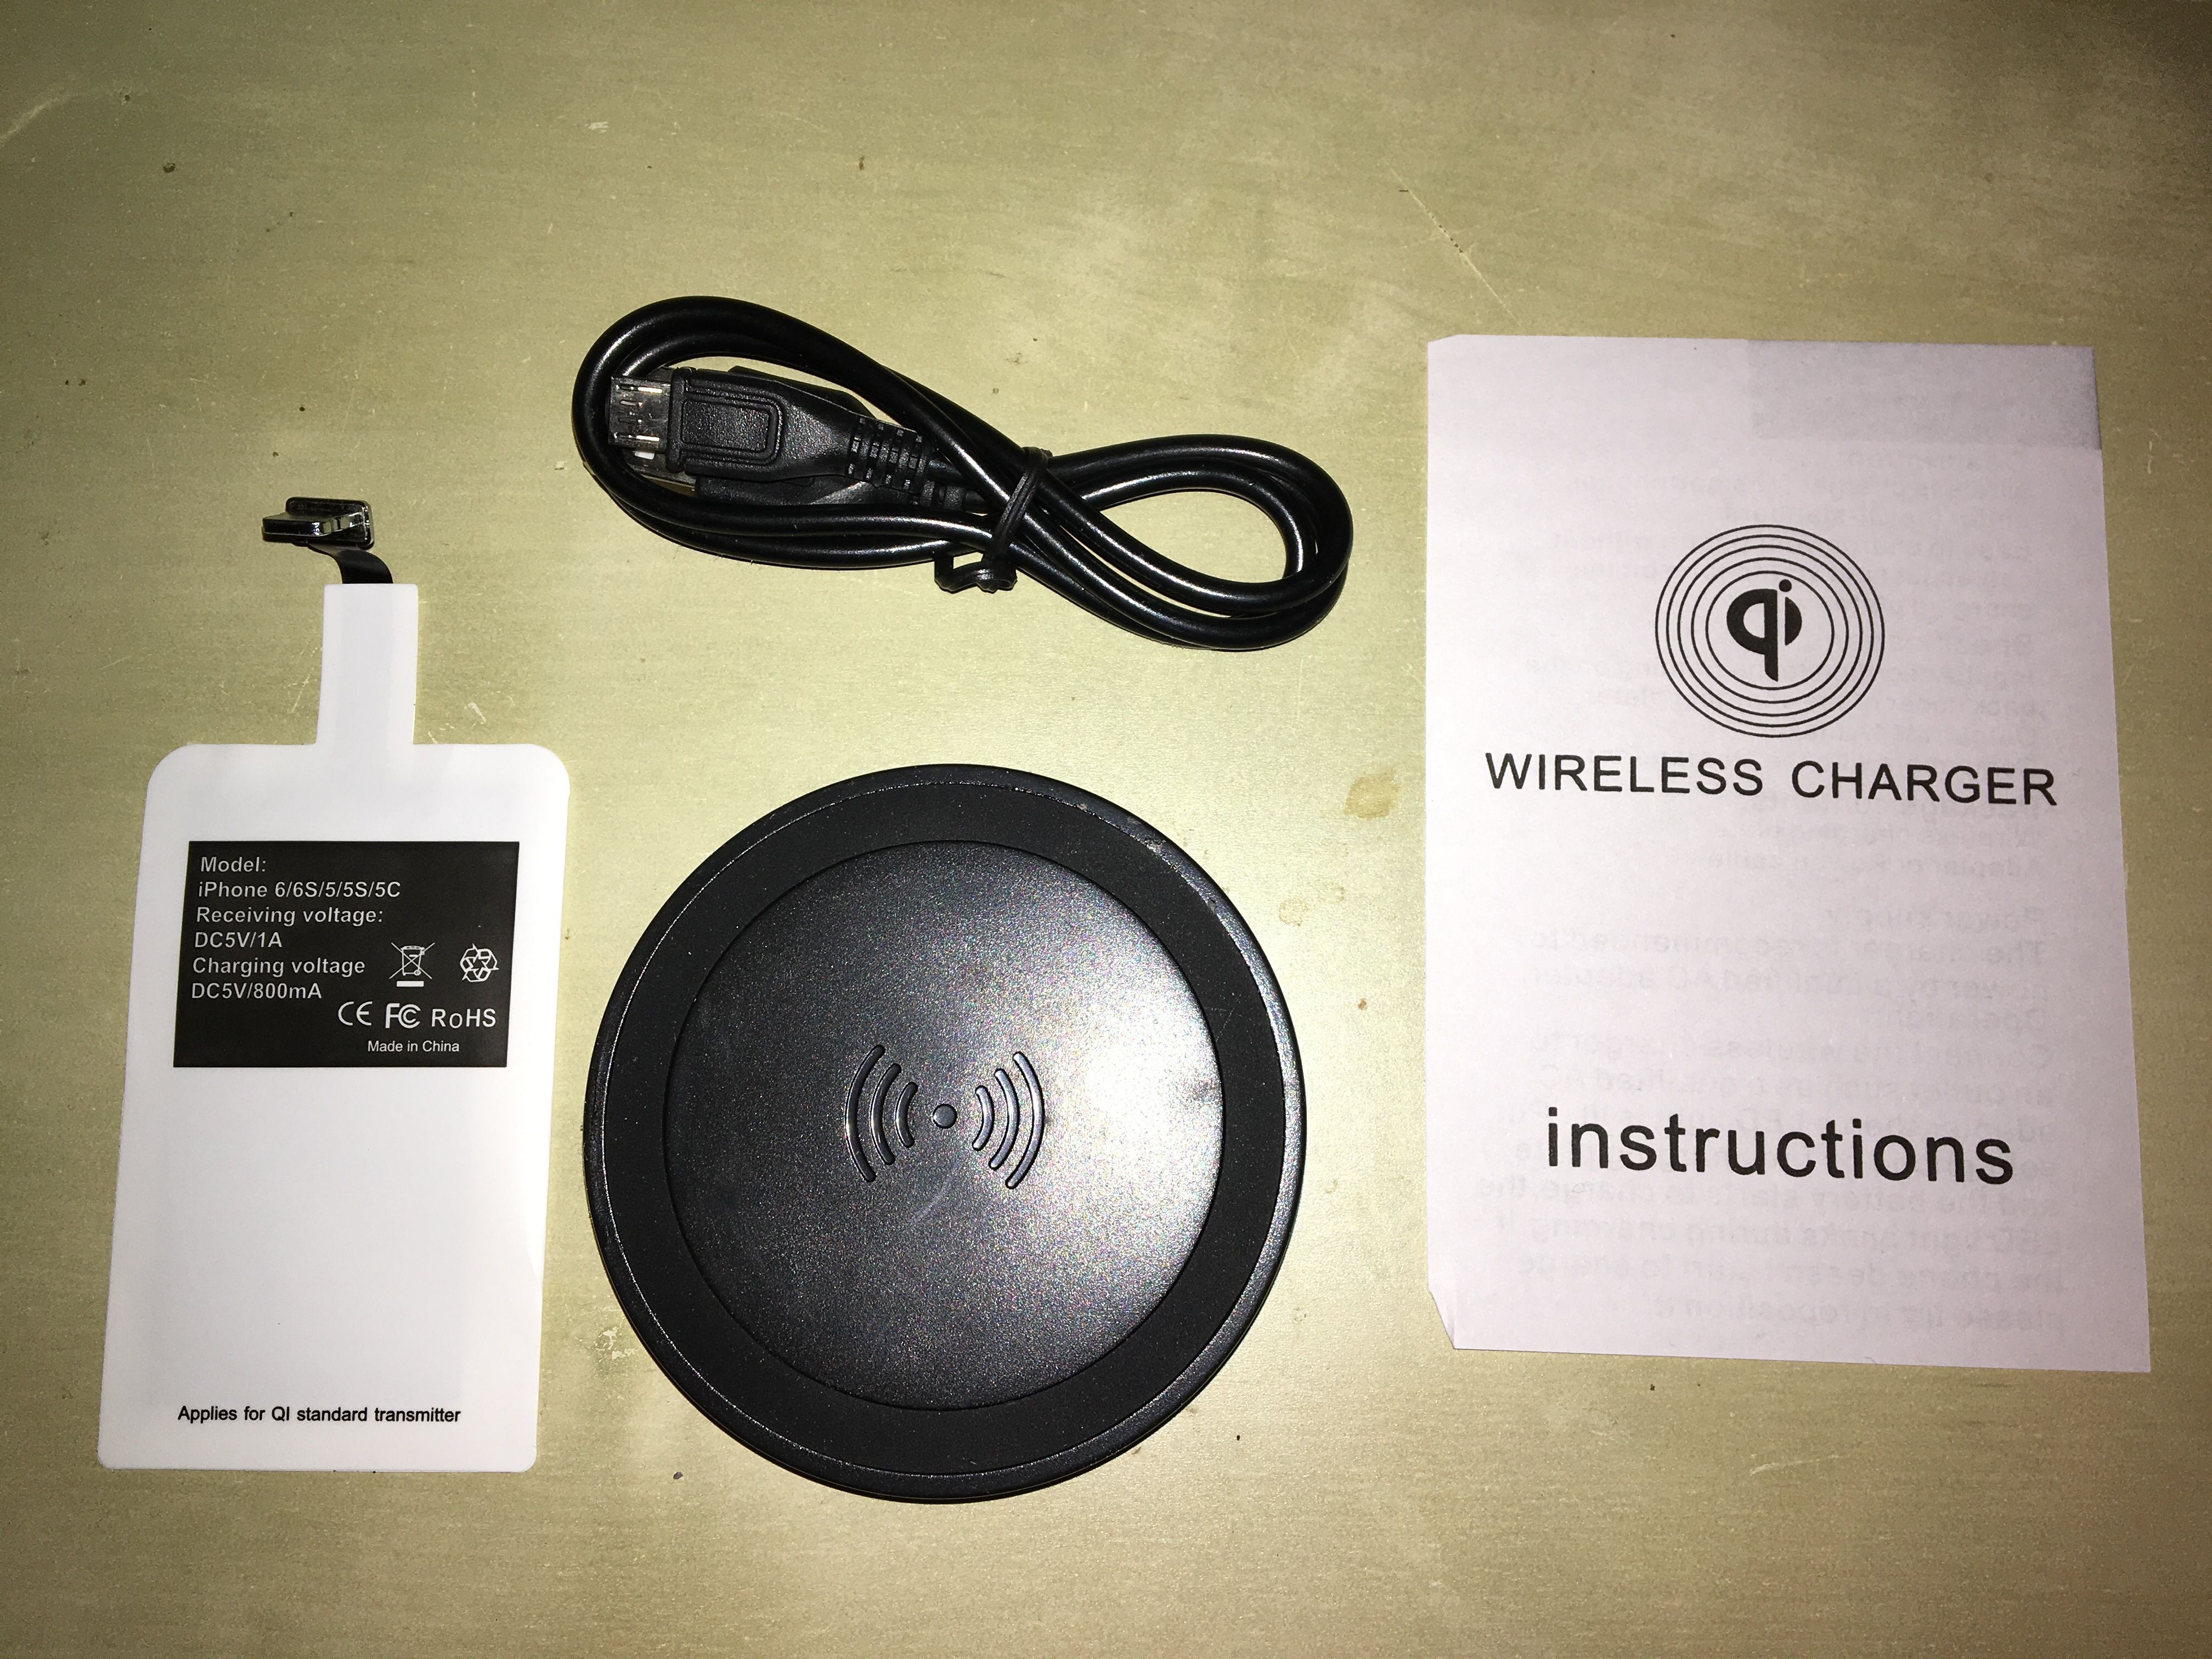 Wireless charger open